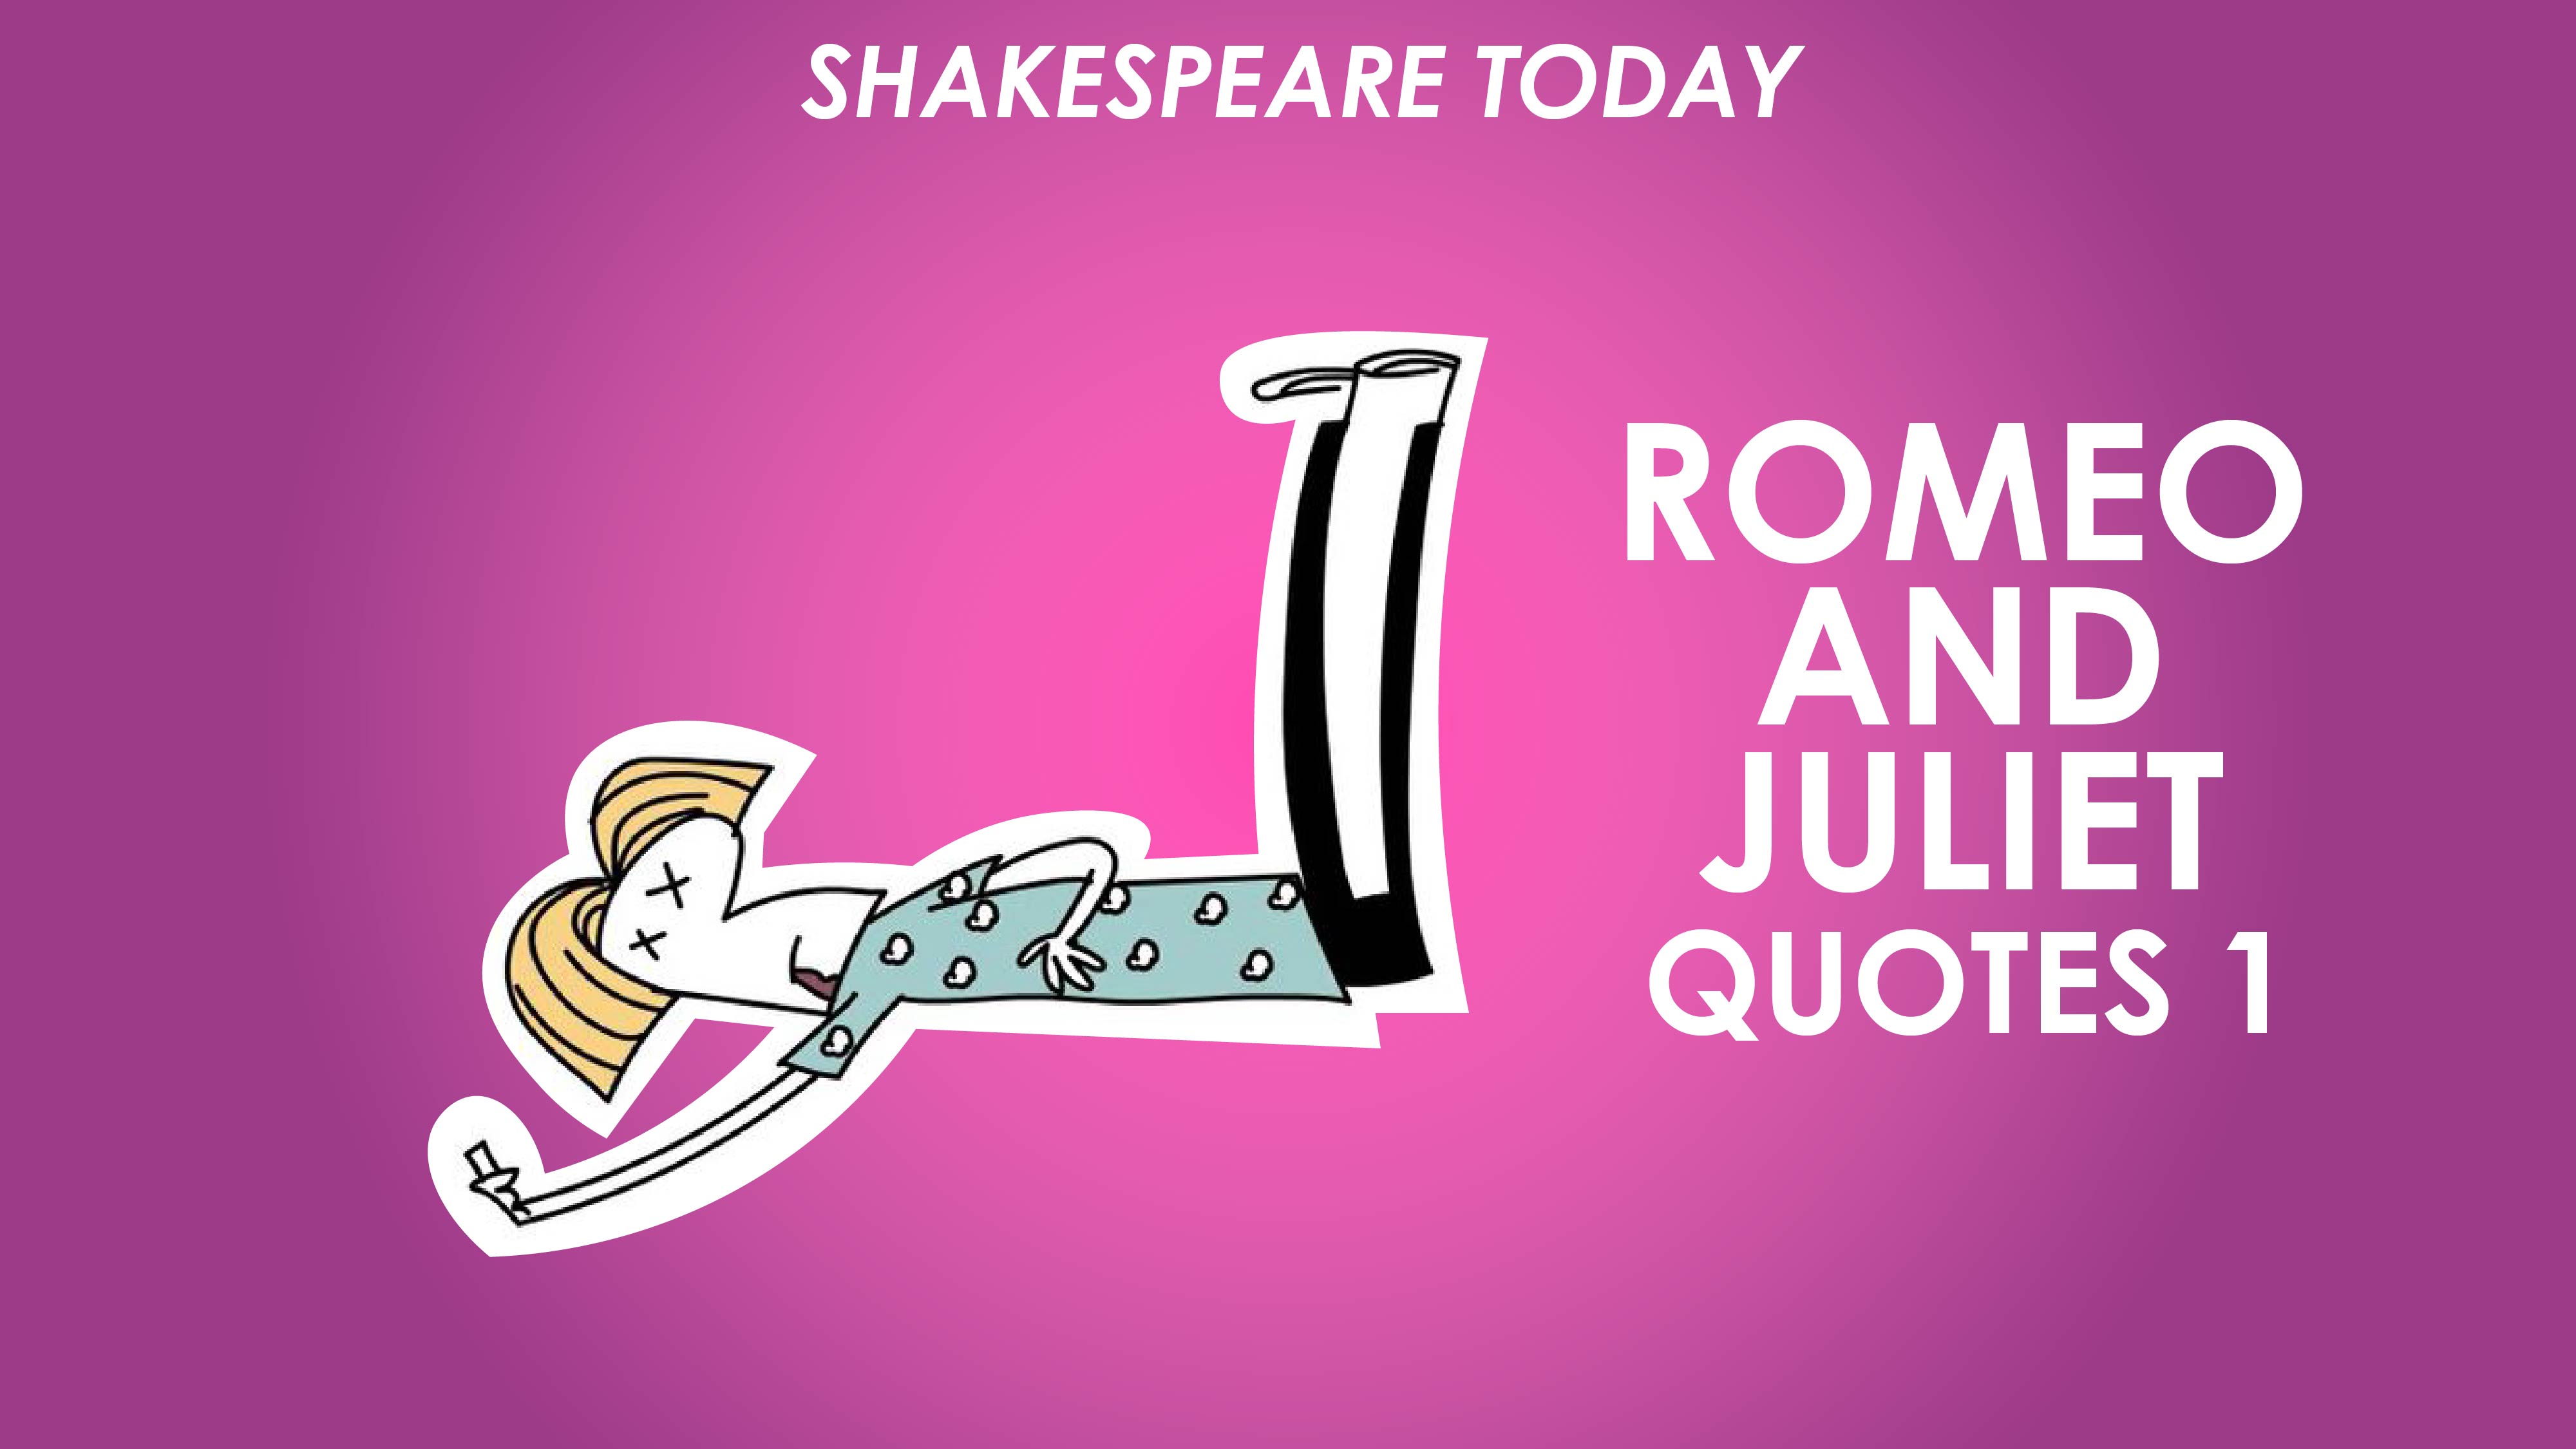 Romeo and Juliet Key Quotes Analysis Part1 - Shakespeare Today